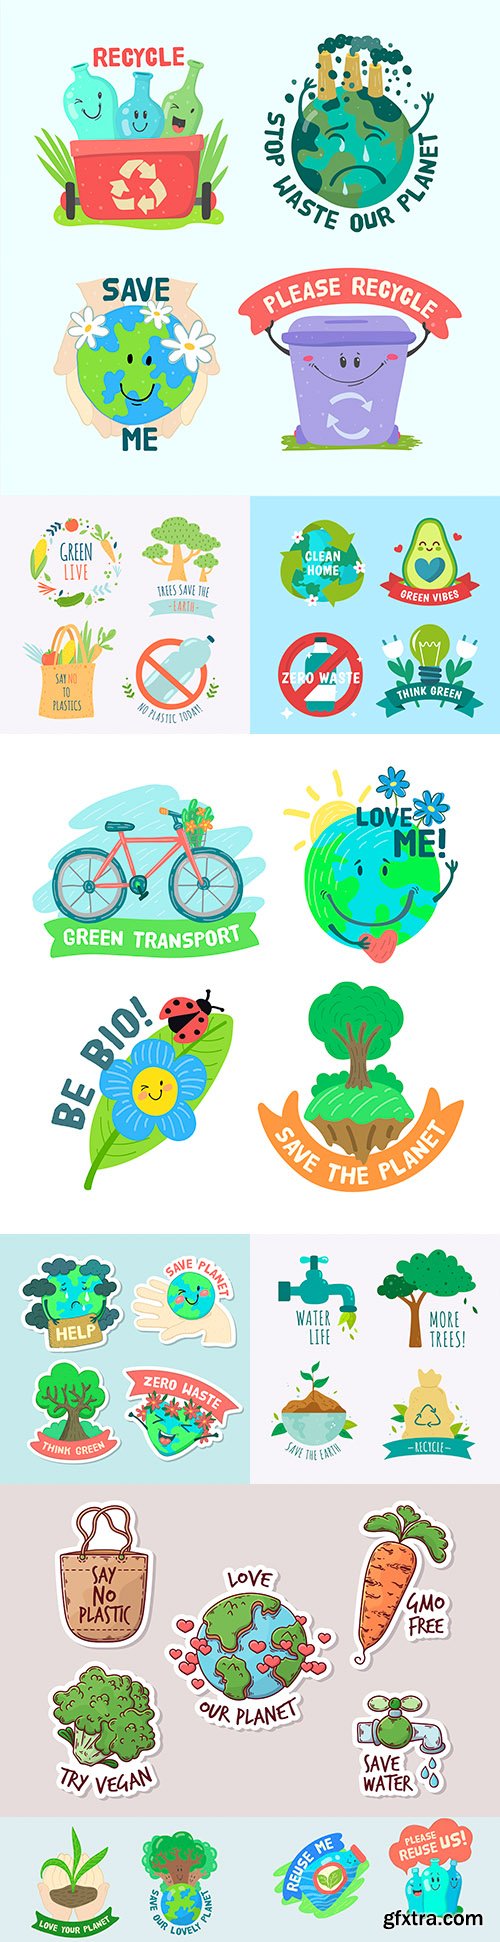 Ecological icon design colorful drawing collection